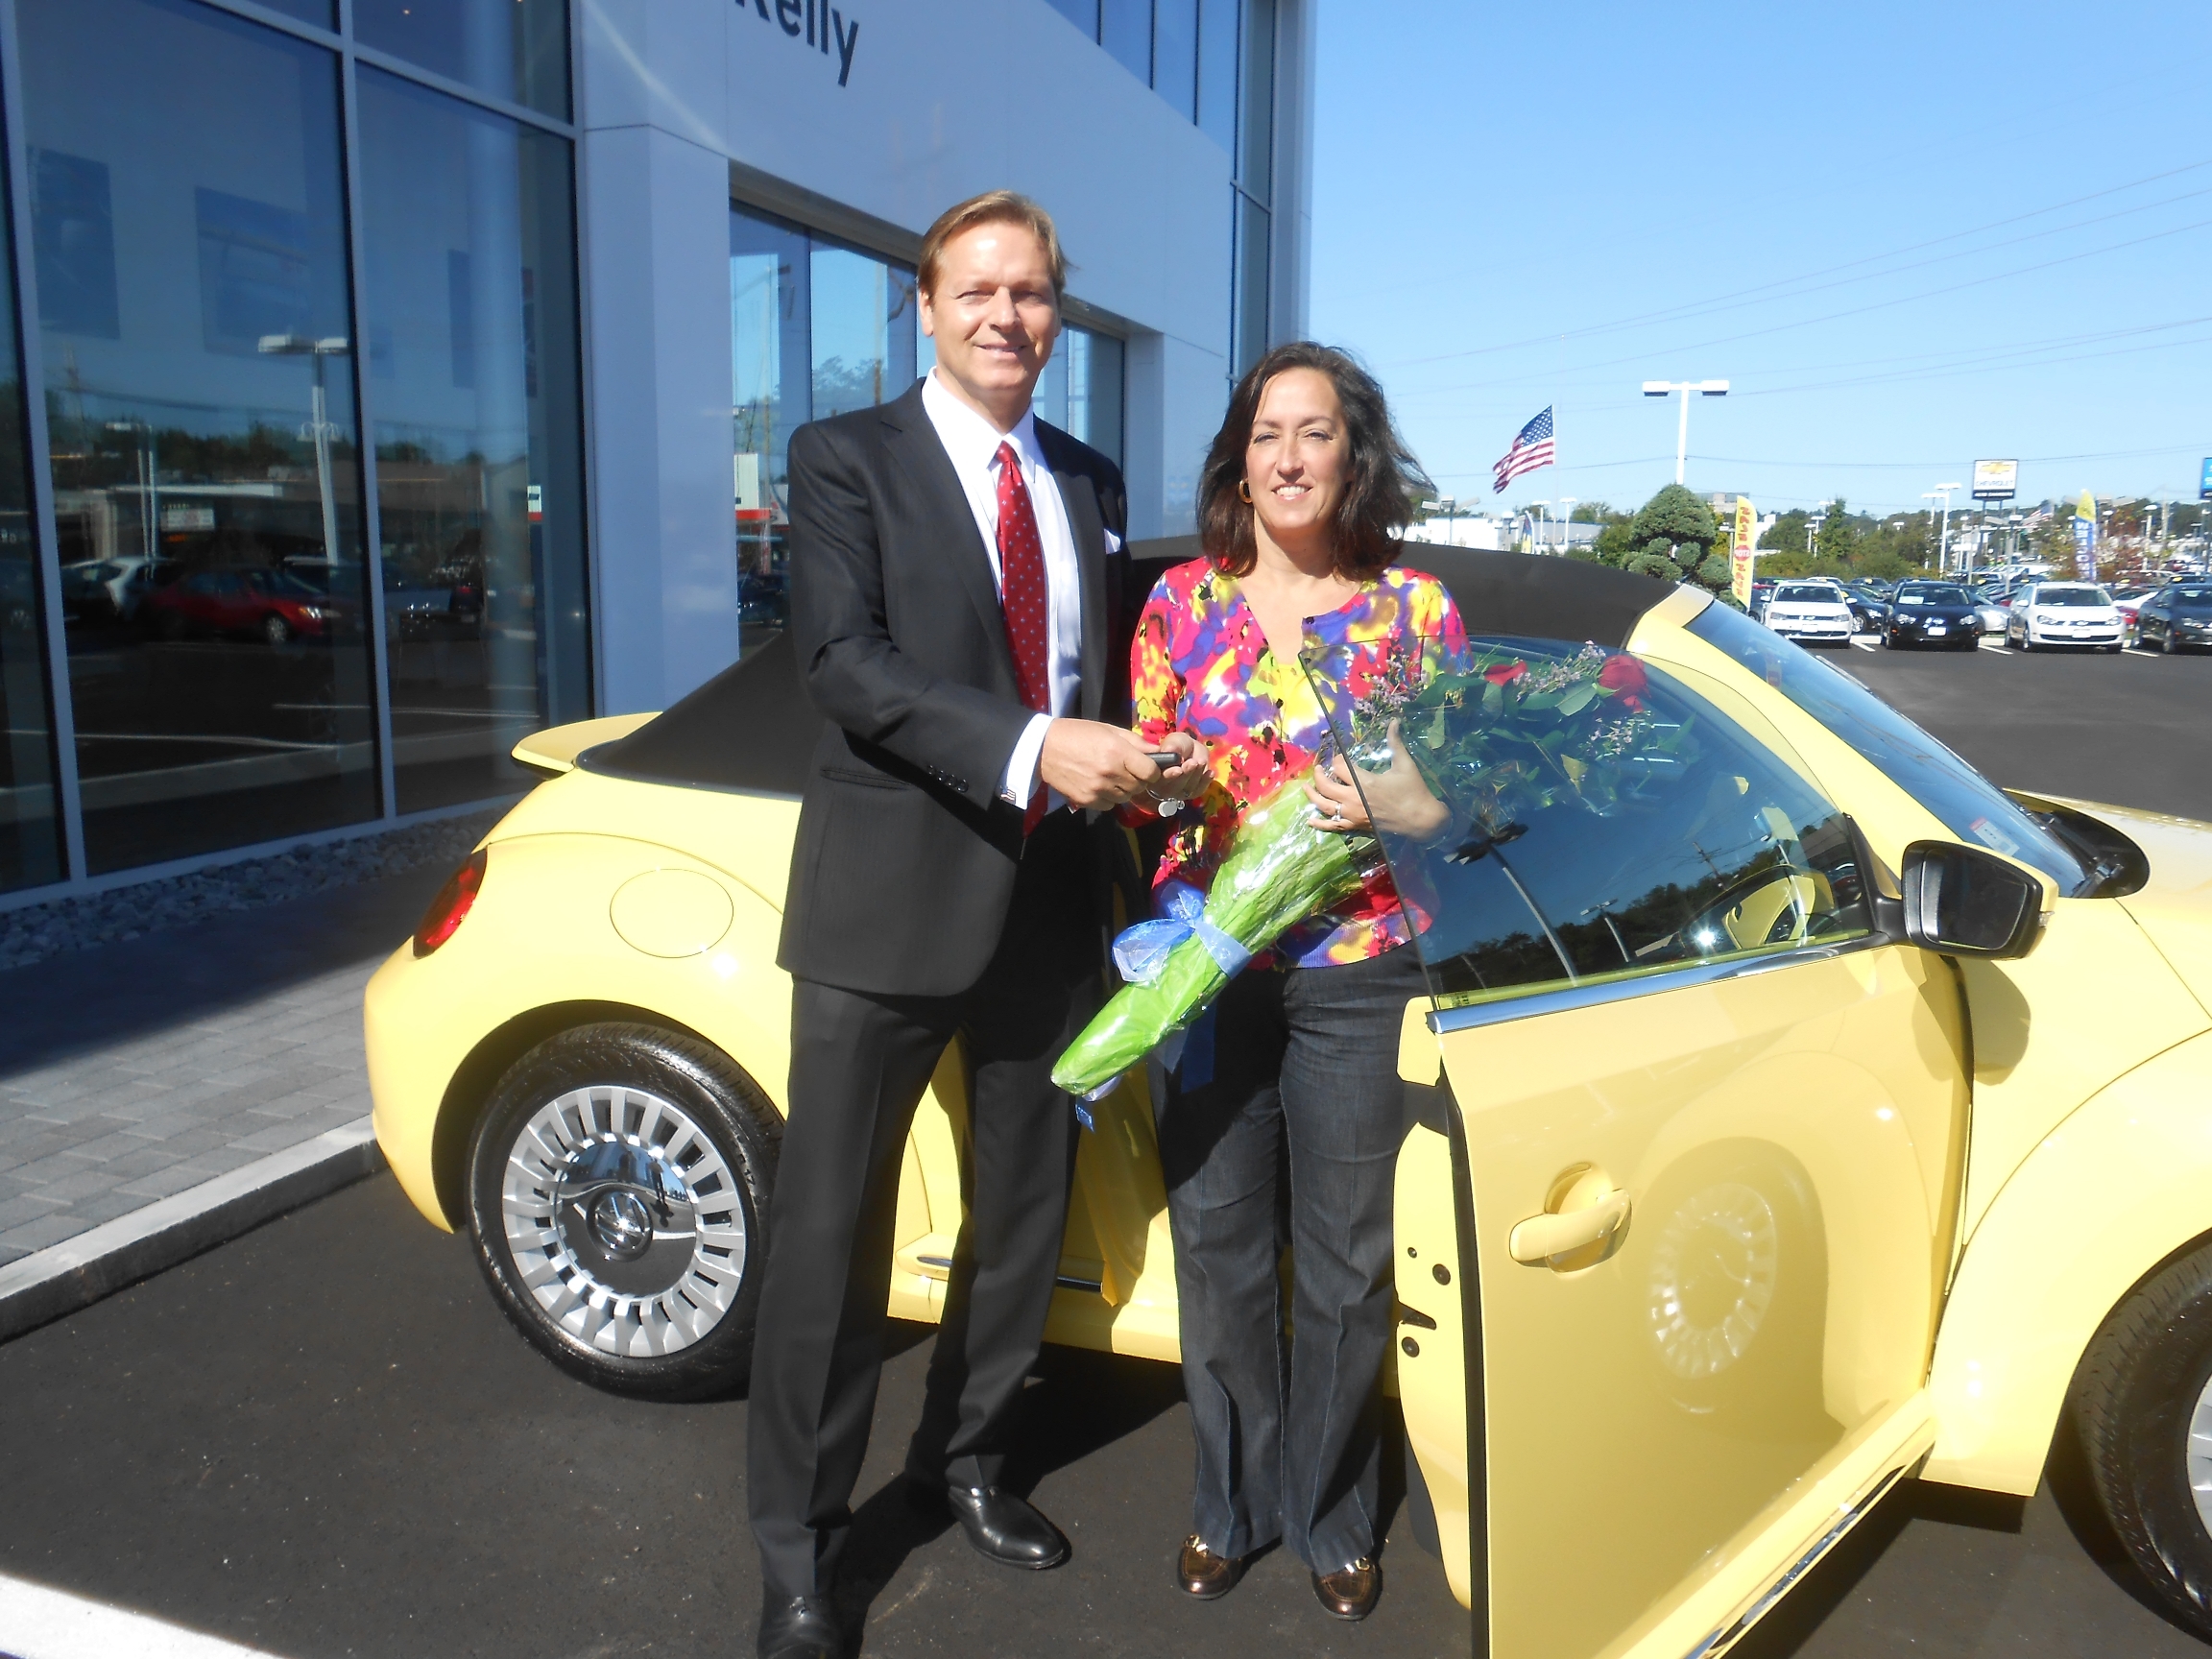 Susan Lichwala was our very first customer at the new Kelly Volkswagen dealership in Danvers, MA and had her Volkswagen Beetle purchase delivered by none other than Kelly Auto Group President Brian Kelly. Thank you for working with us Susan and we hope you'll be back in the future for more great VW service!